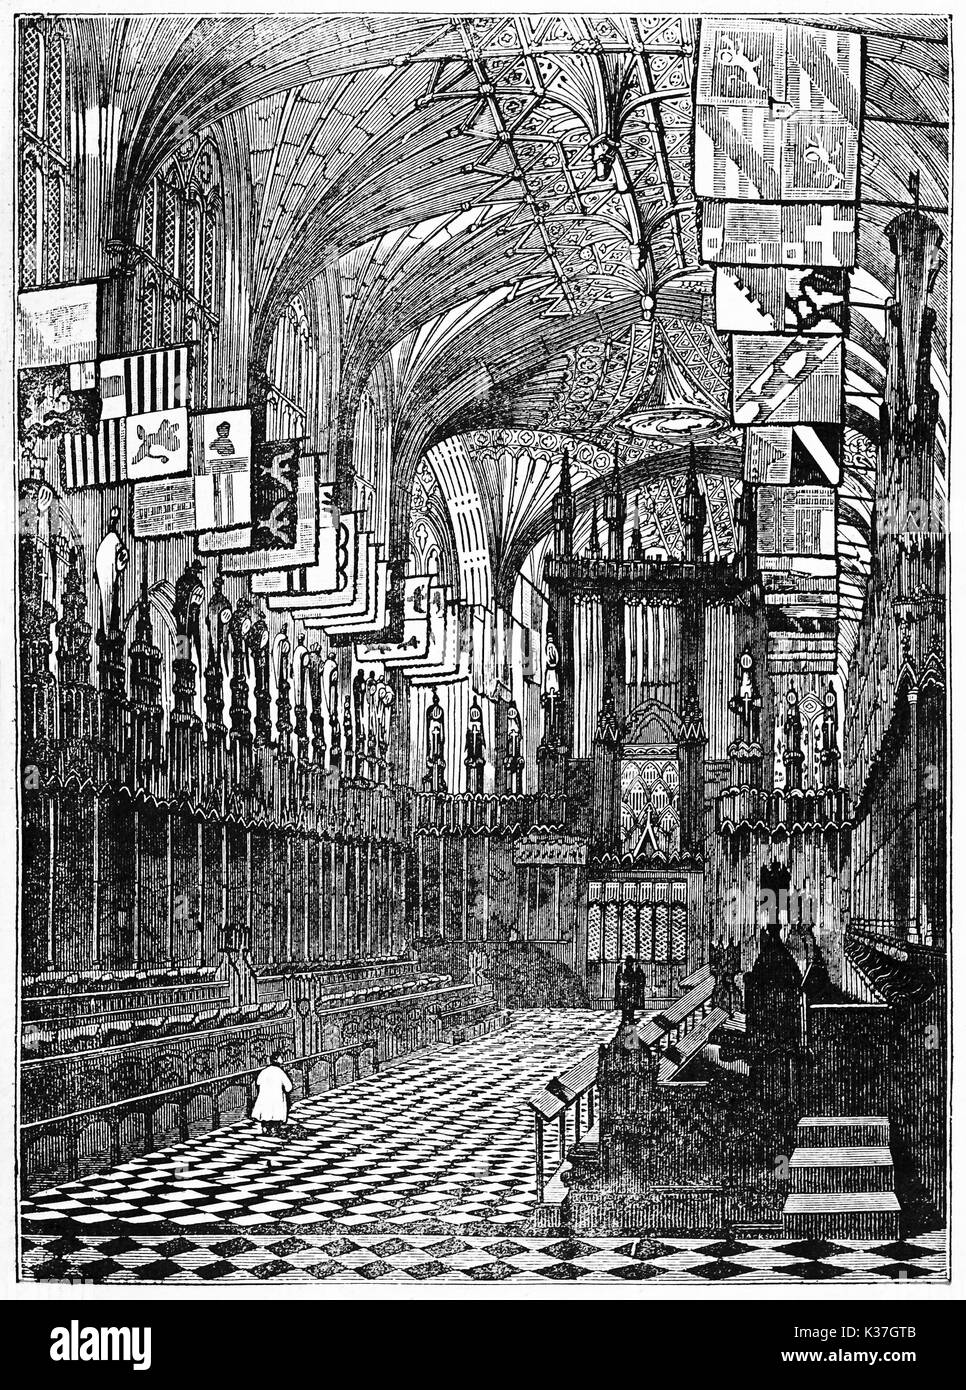 Majestic View Of Windsor Castle Chapel Interior With Several